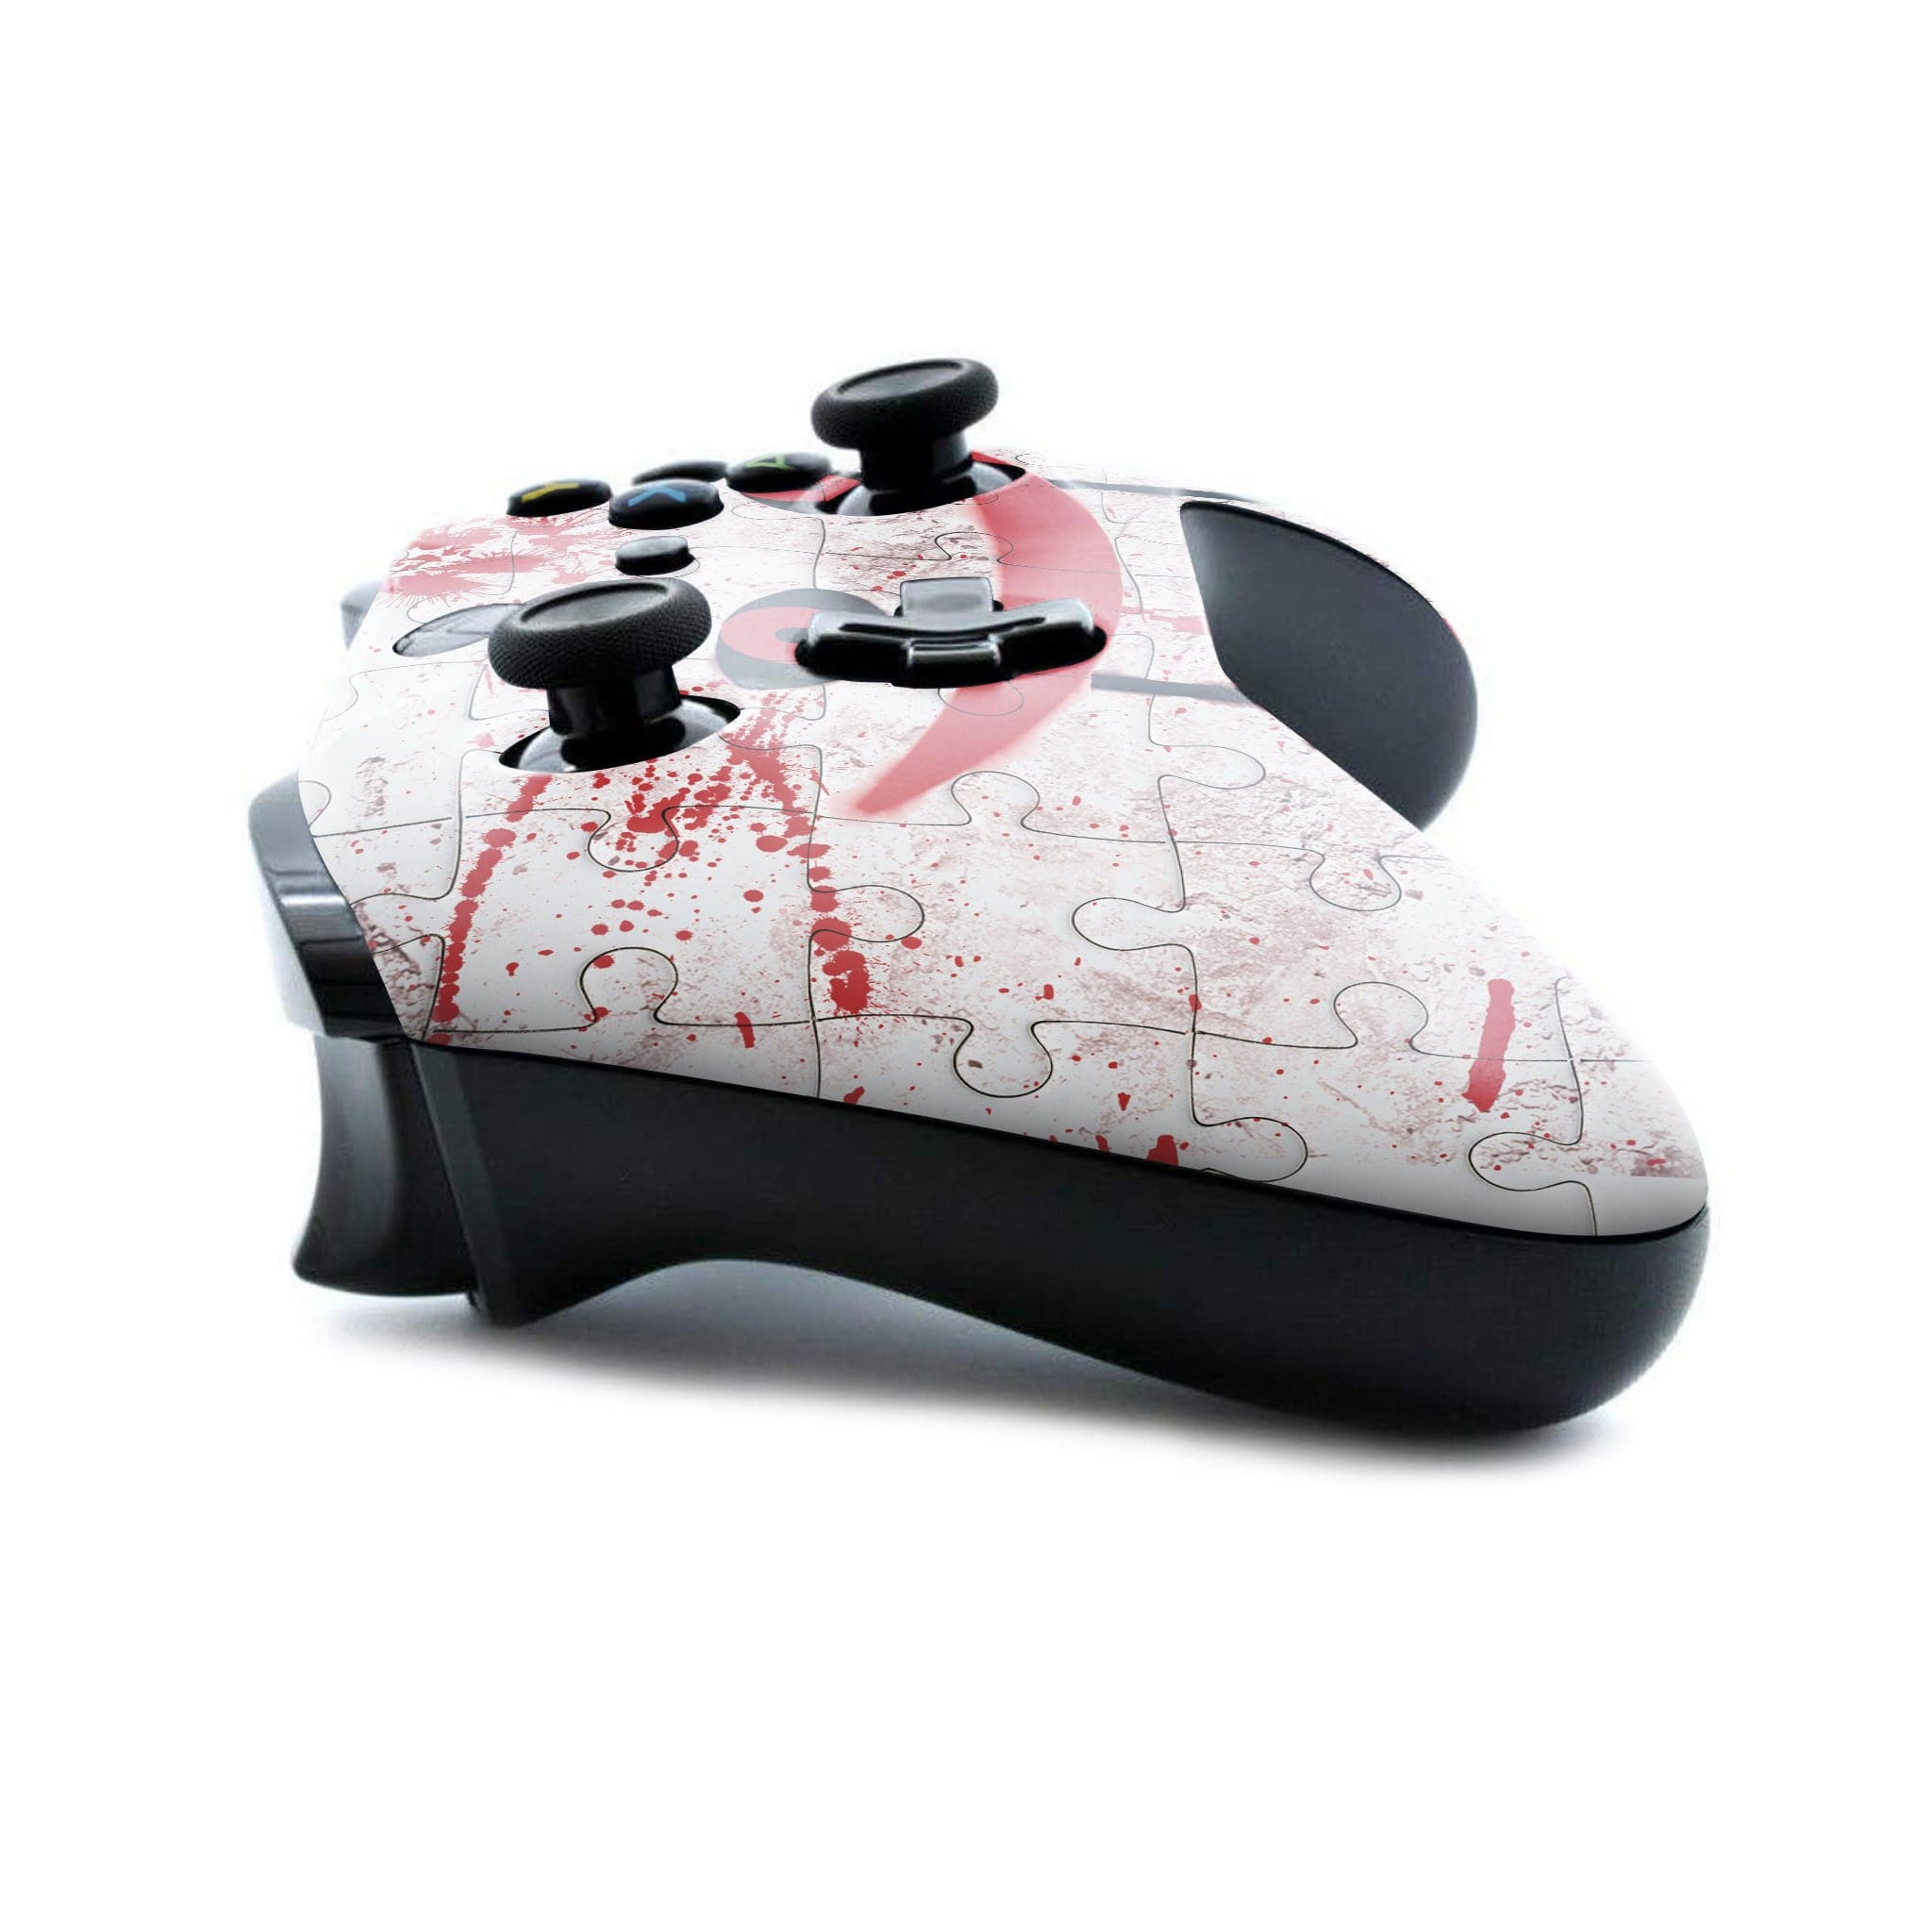 Halloween SAW Xbox One Controller compatible with Series X